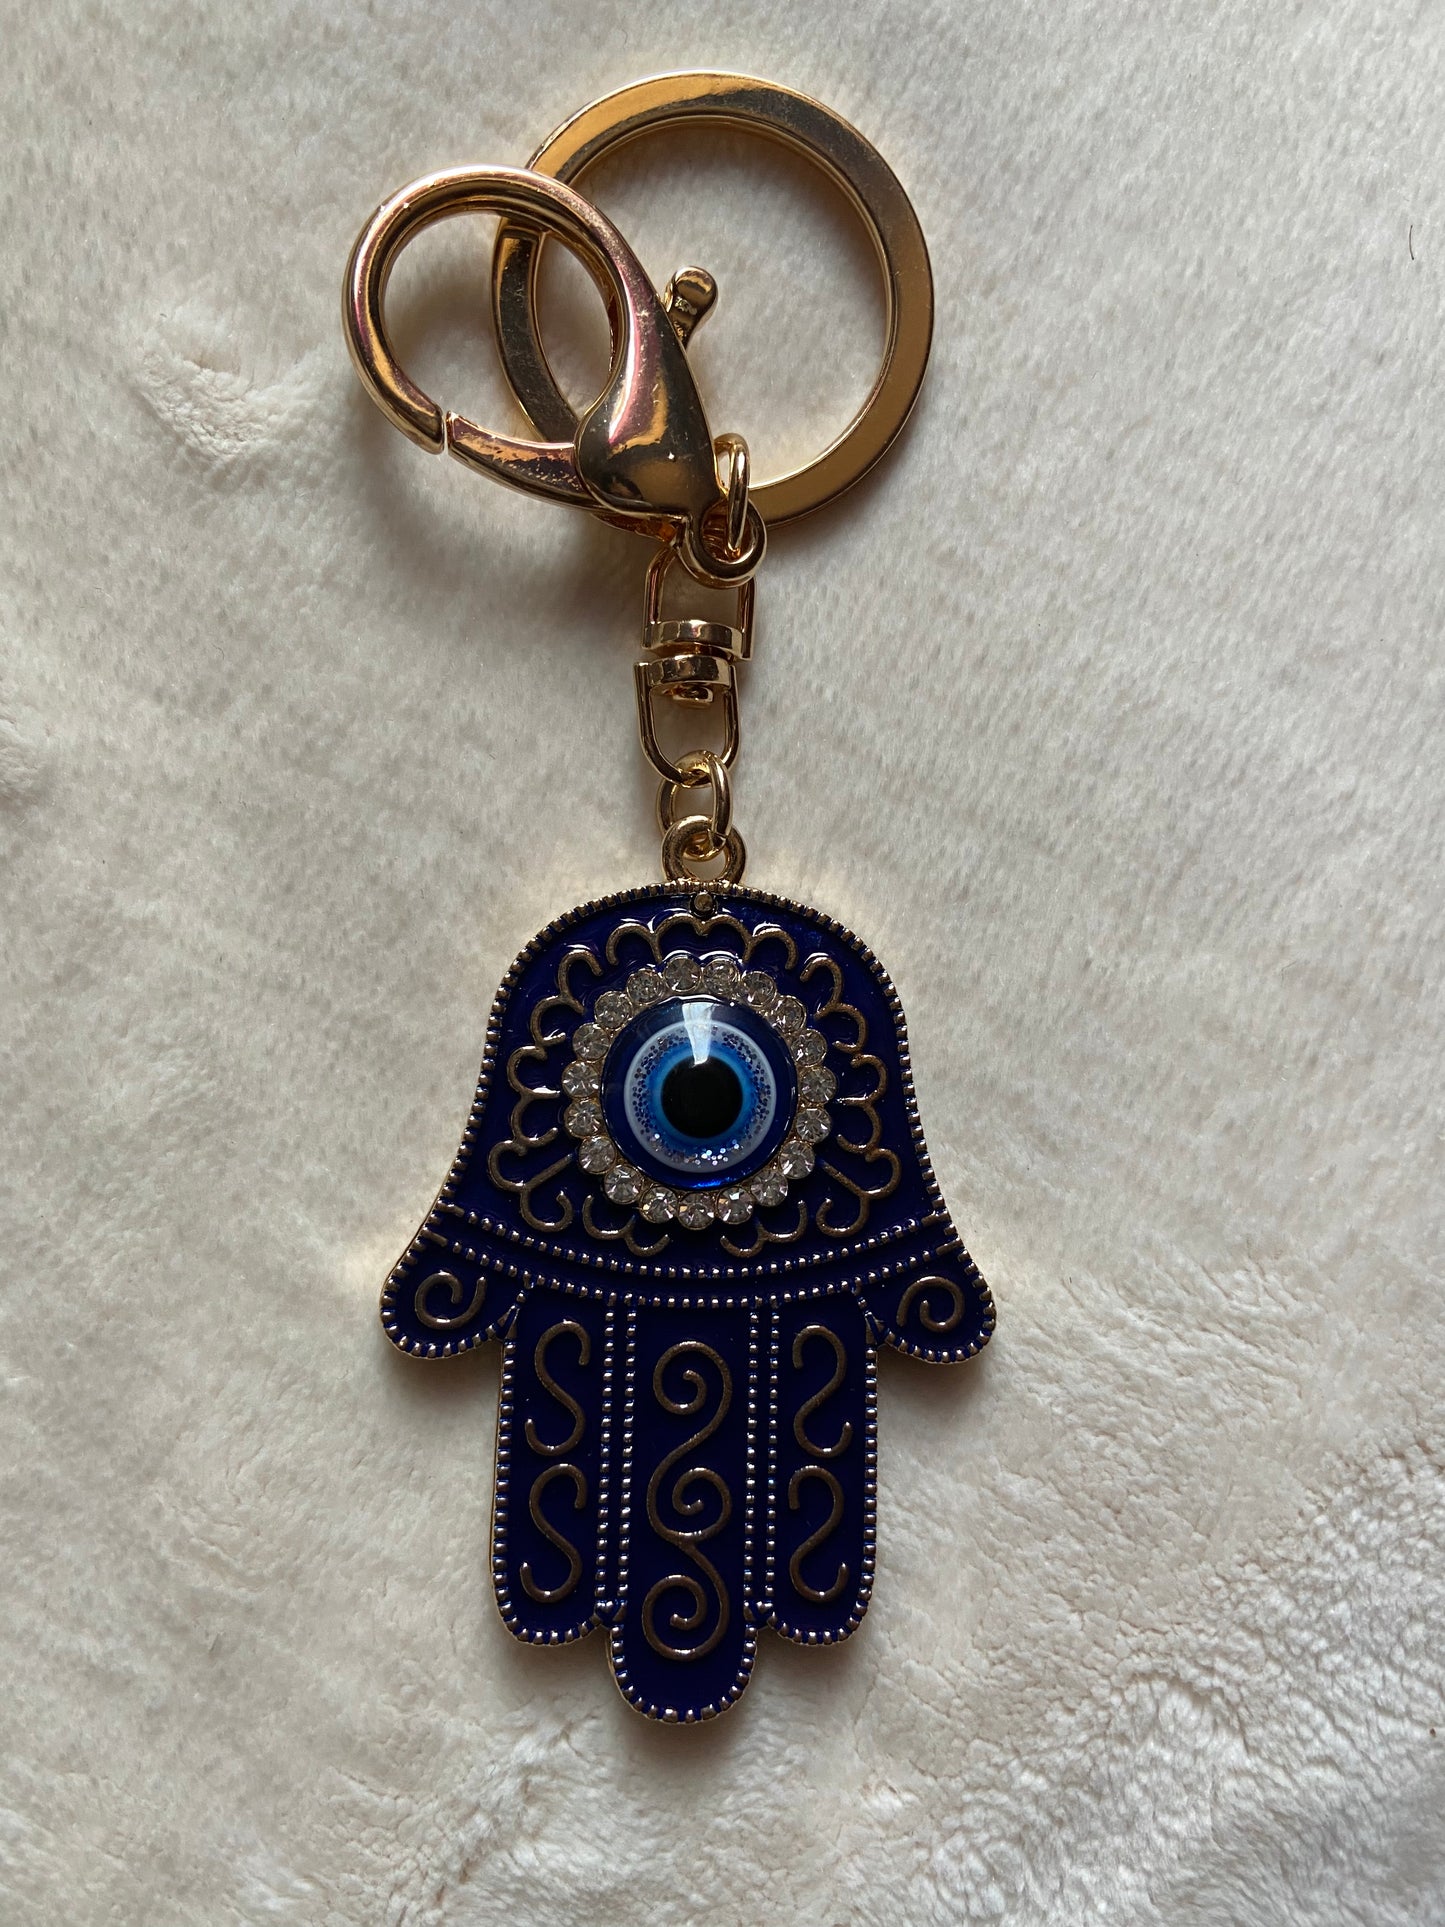  Evil Eye Key Chain - Keychains available at Amazing Creations Products . Grab yours for $4.99 today!